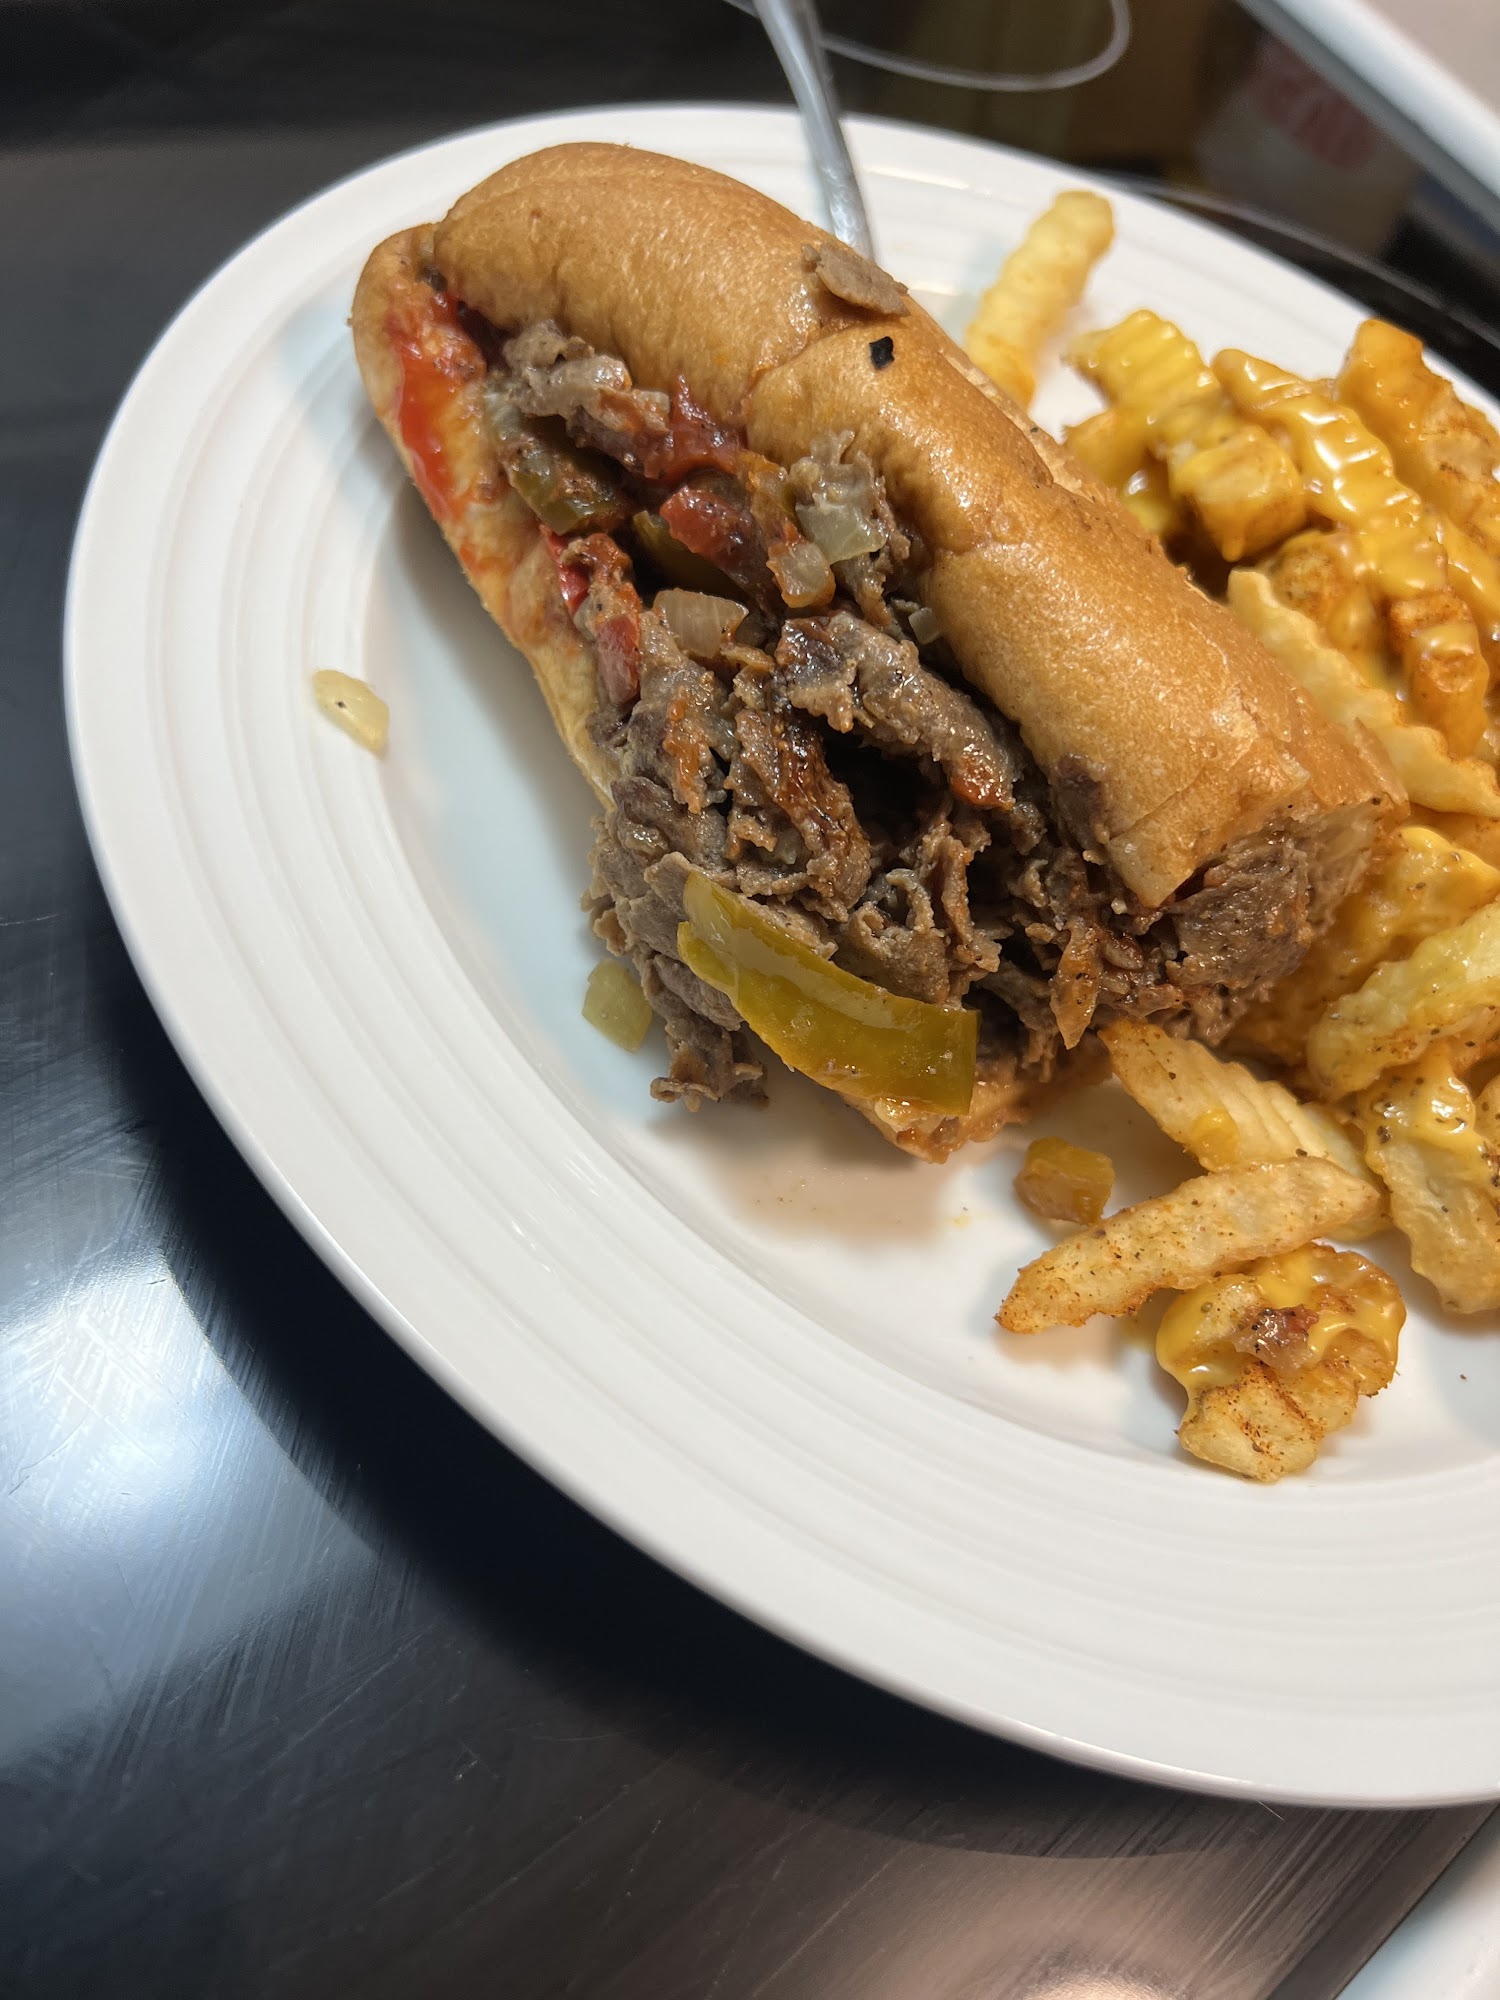 Milan's Real Philly Cheesesteaks and Hoagies